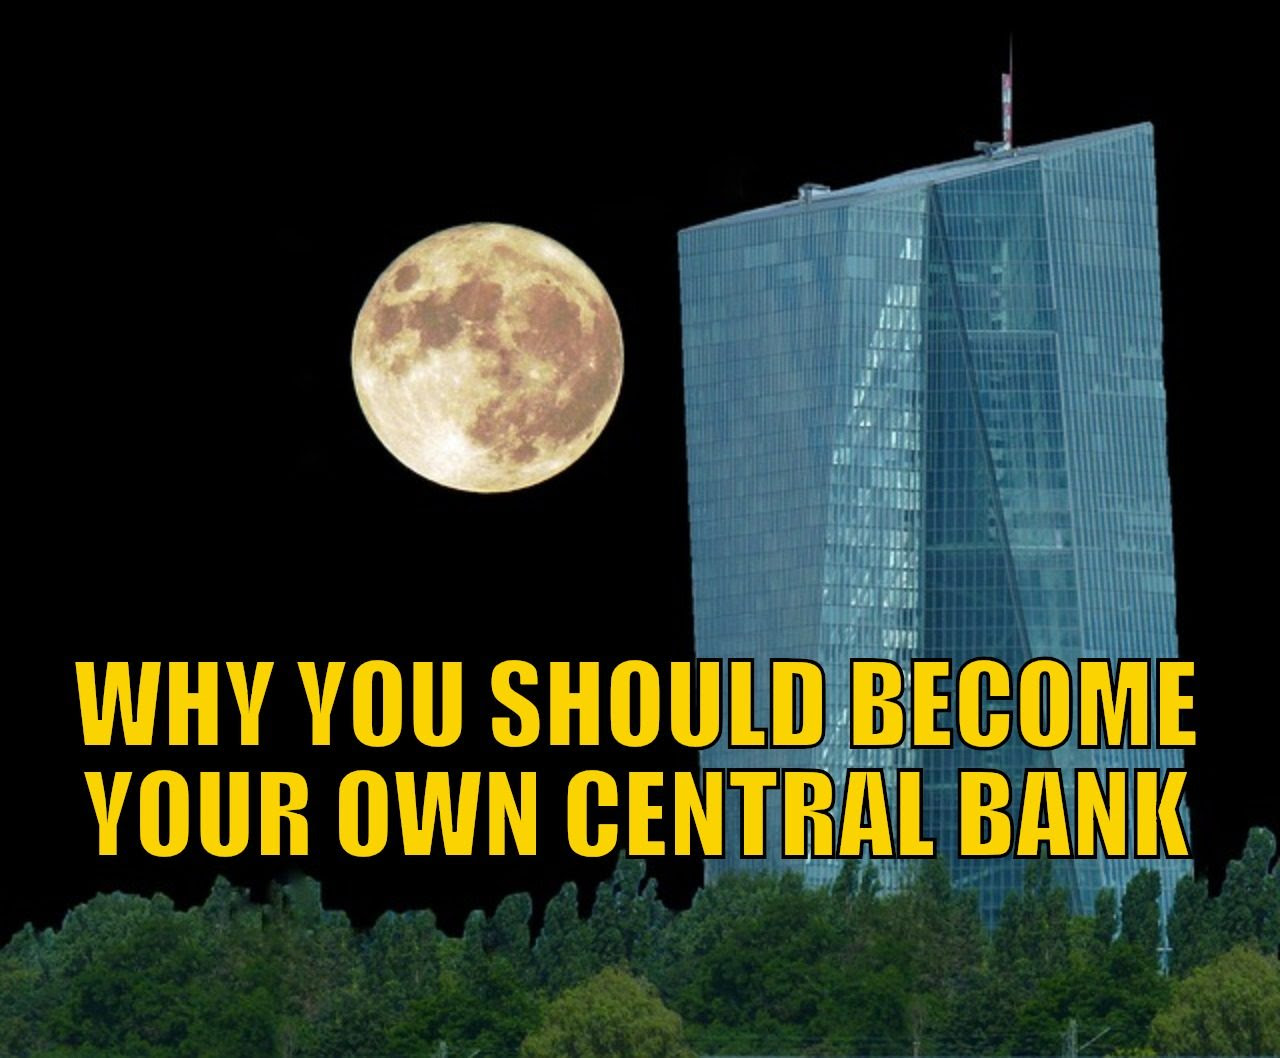 Why You Should Become Your Own Central Bank - Even if Your Nation’s Central Bank Has Gold Reserves